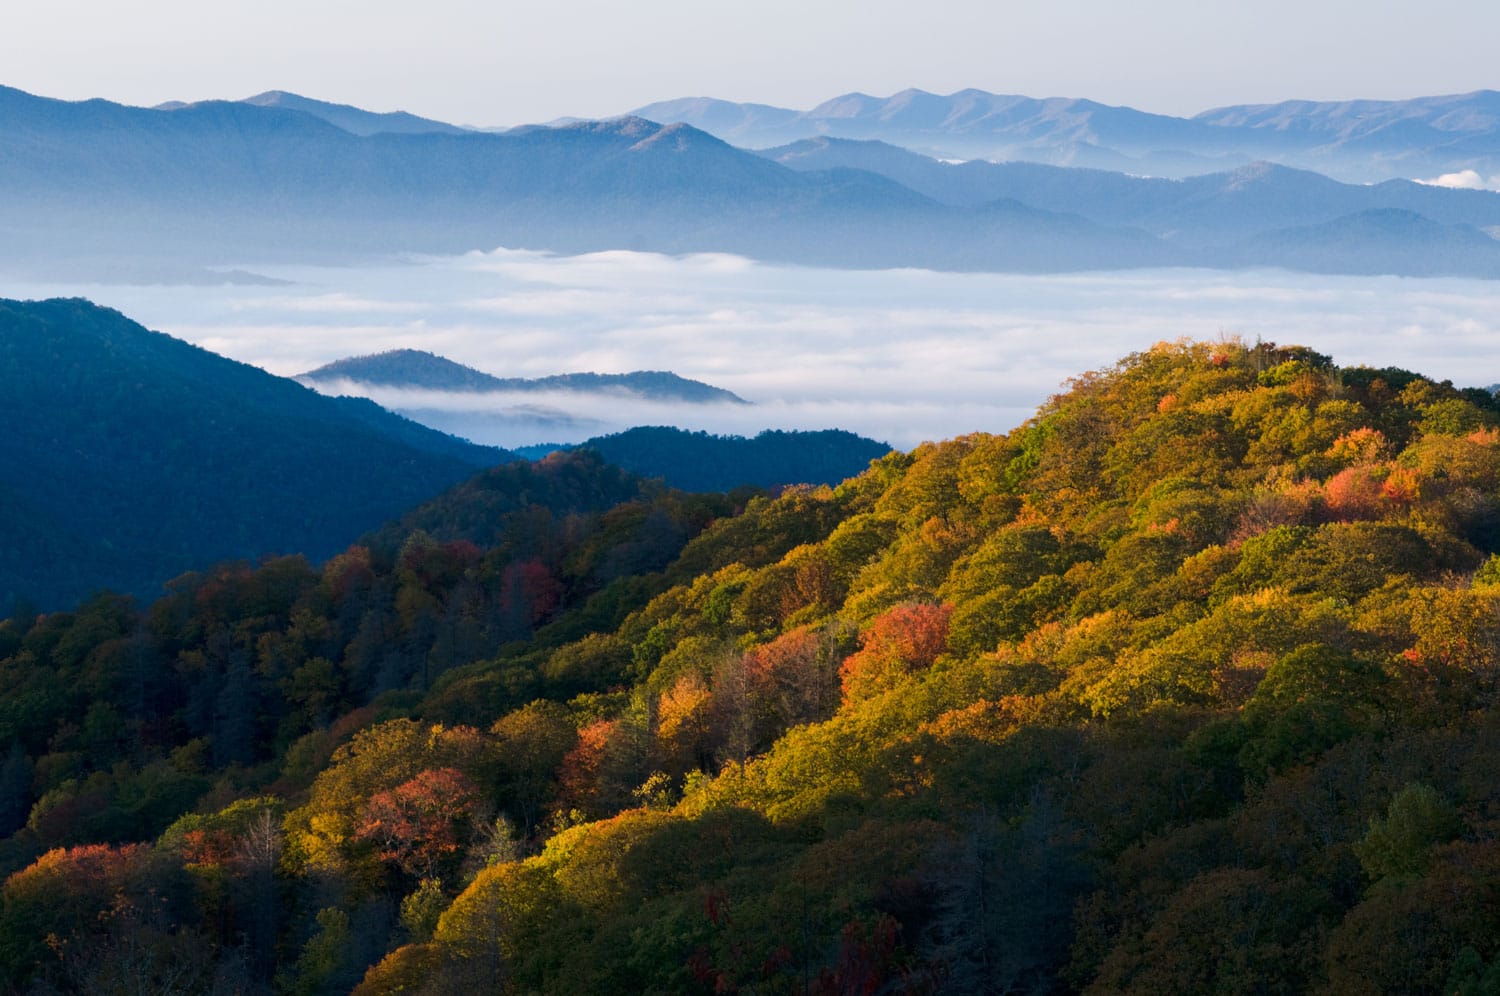 Fall colors in the Smoky Mountains National Park